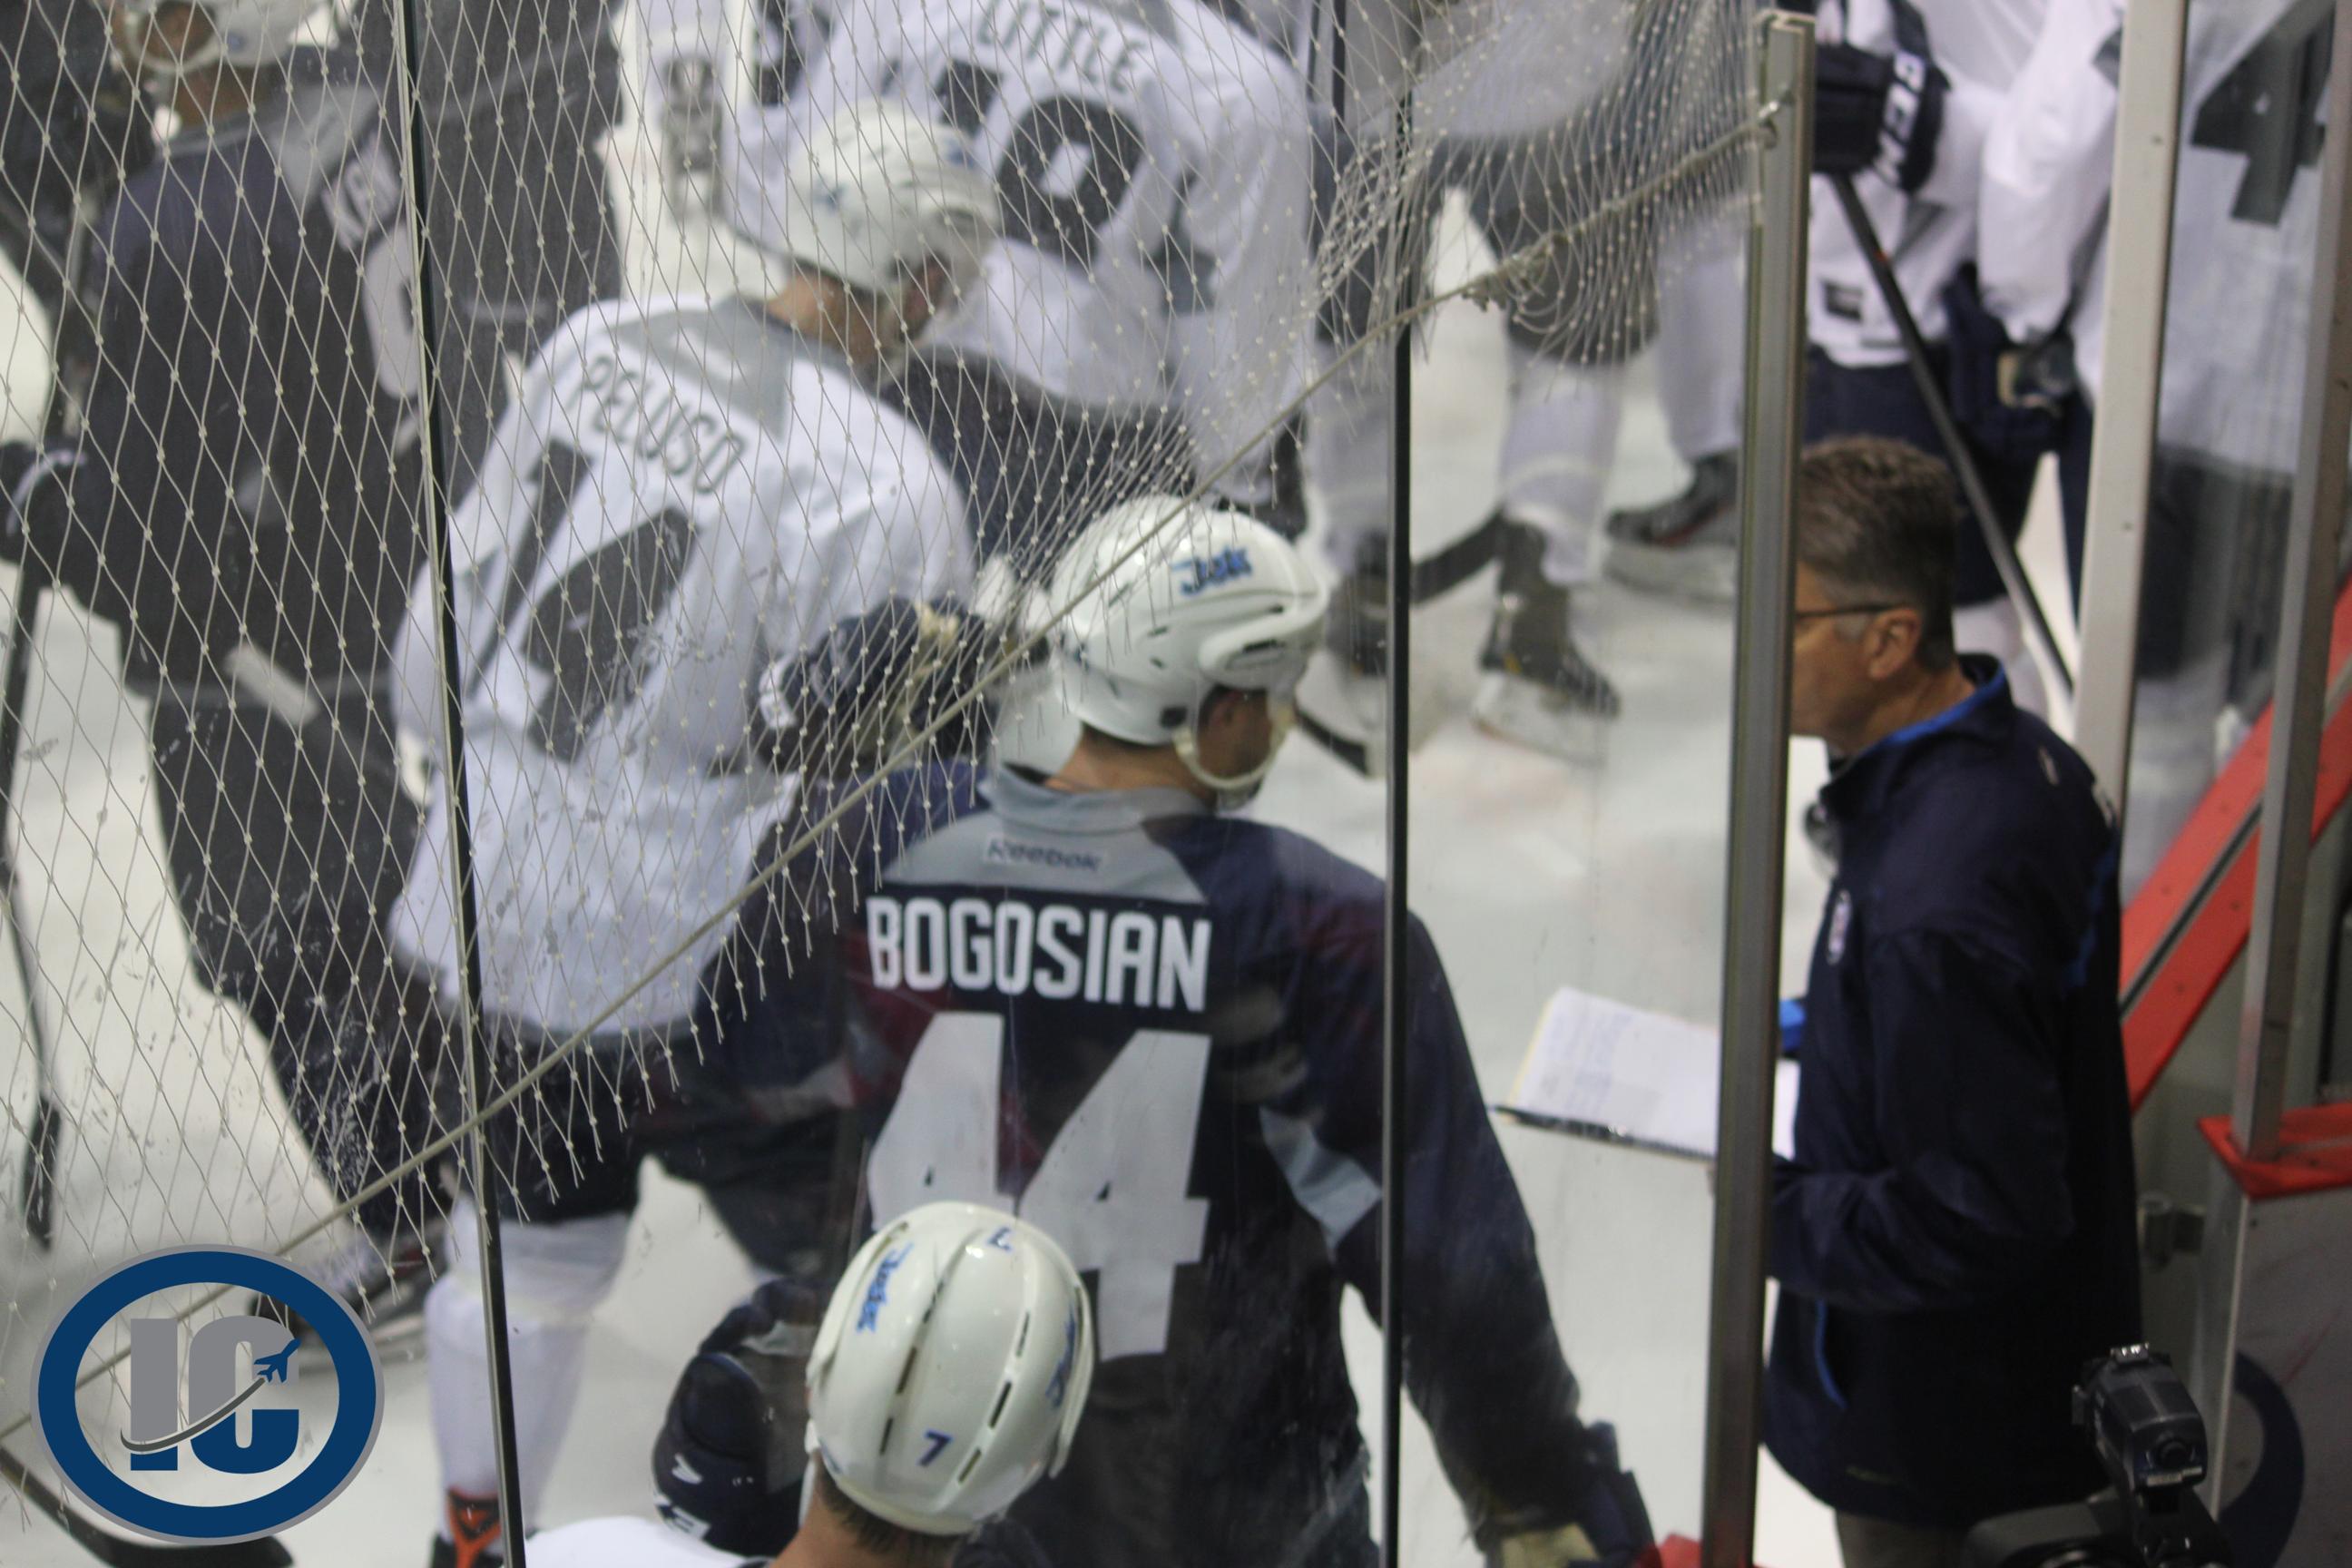 Coach Noel and Bogosian talking on Day 1 of Camp